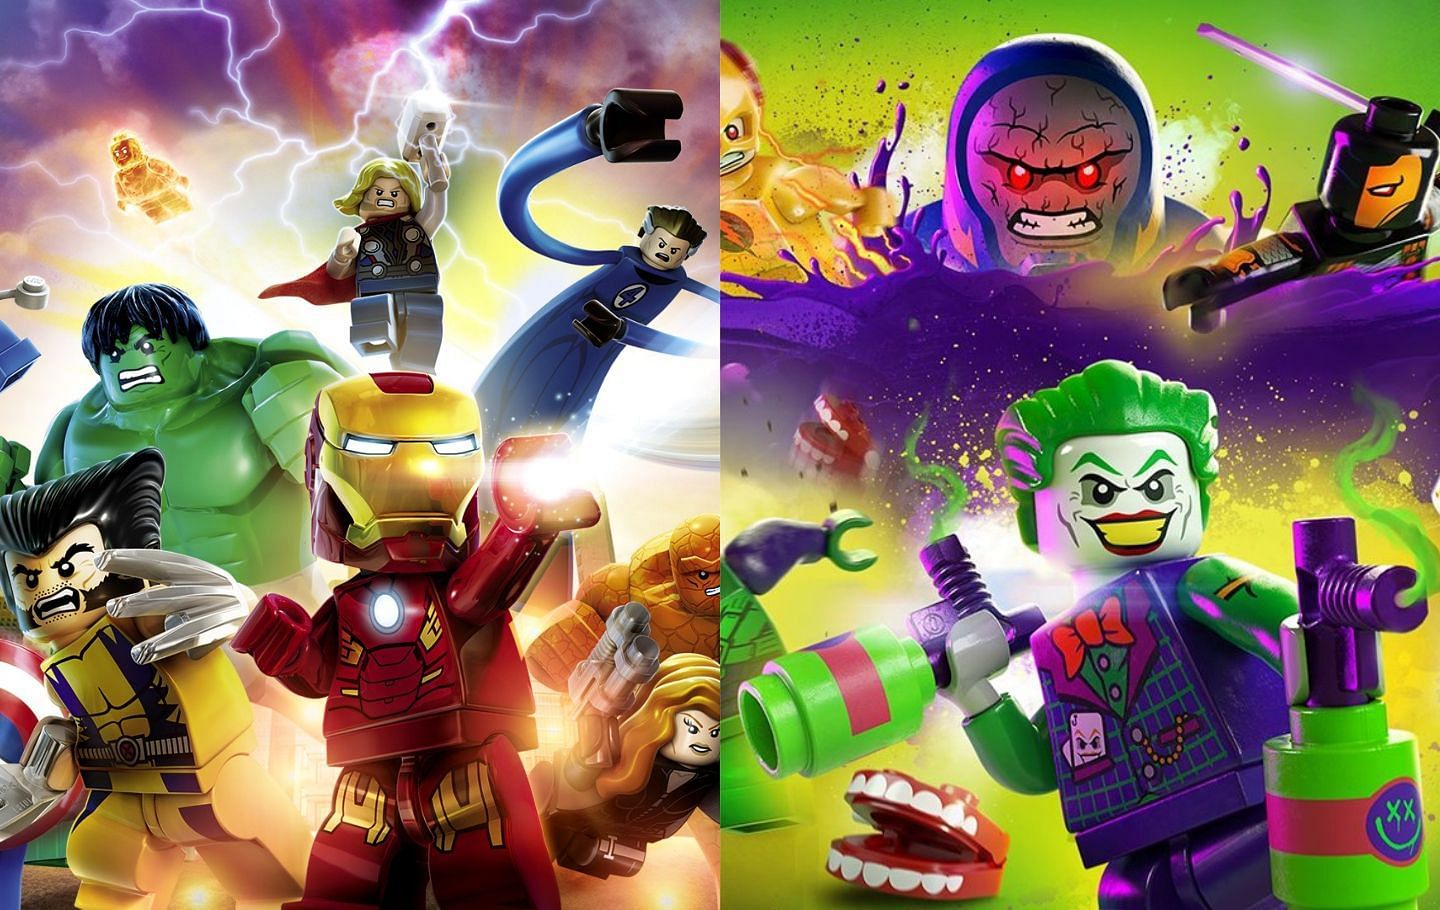 These LEGO entries are based on some of the most popular media franchises out there (Images via Warner Bros. Interactive Entertainment)